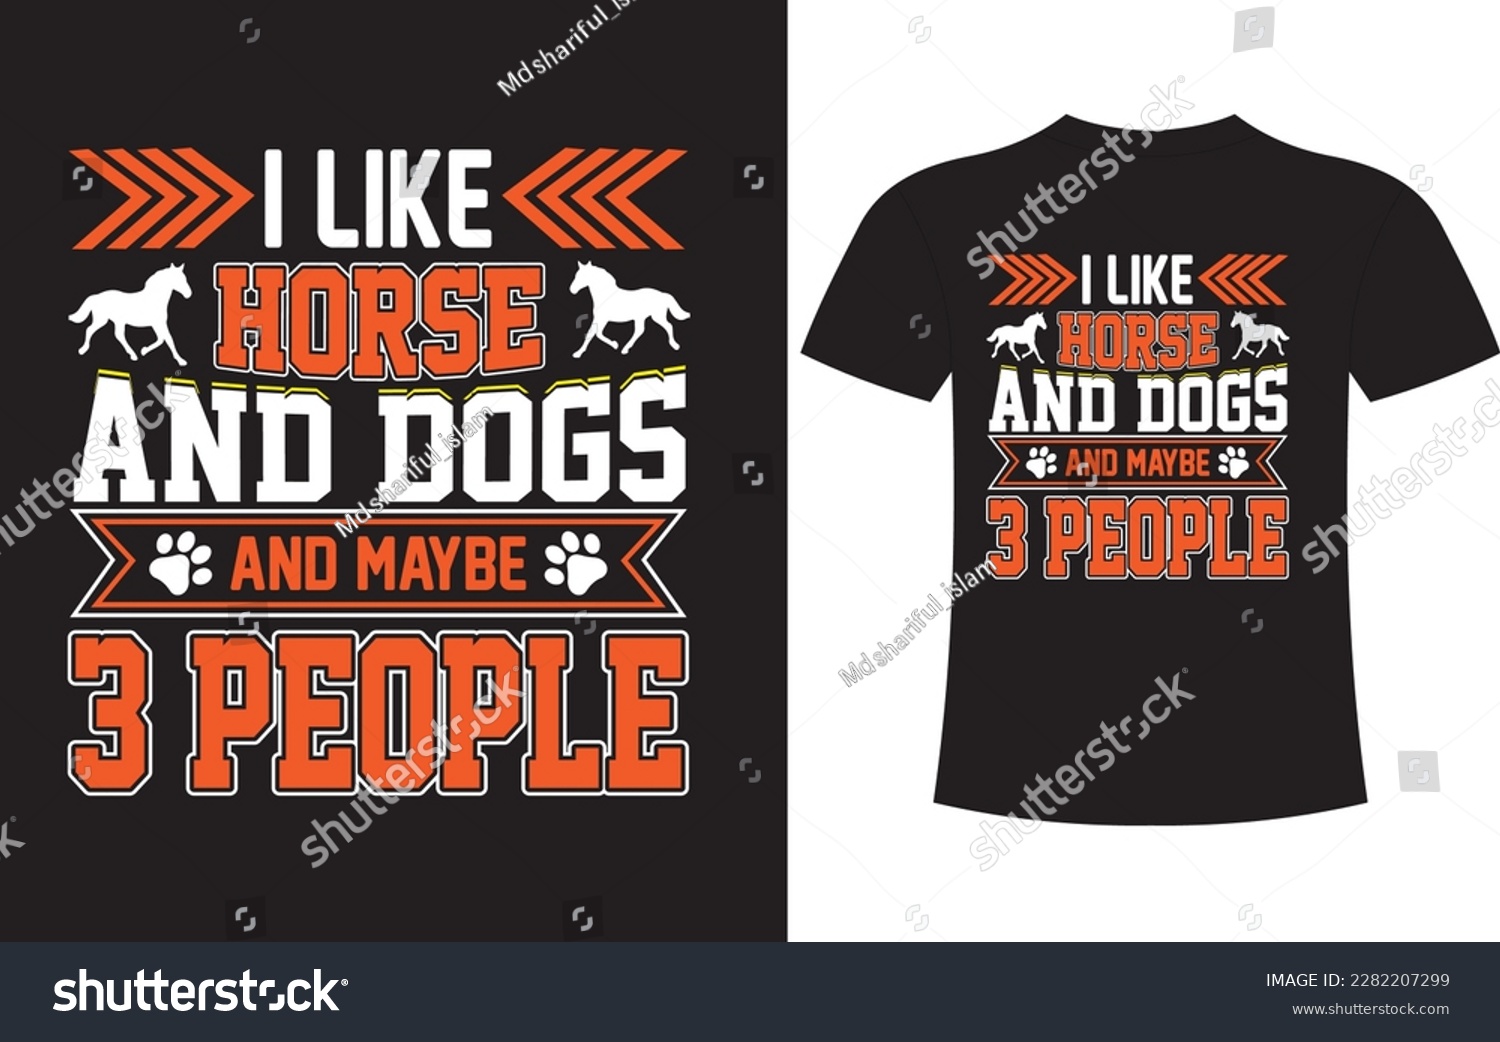 SVG of I like horse and dogs and maybe 3 people vactore t-shirt design  Ready to print for apparel, poster, and illustration. Modern, simple, lettering. svg